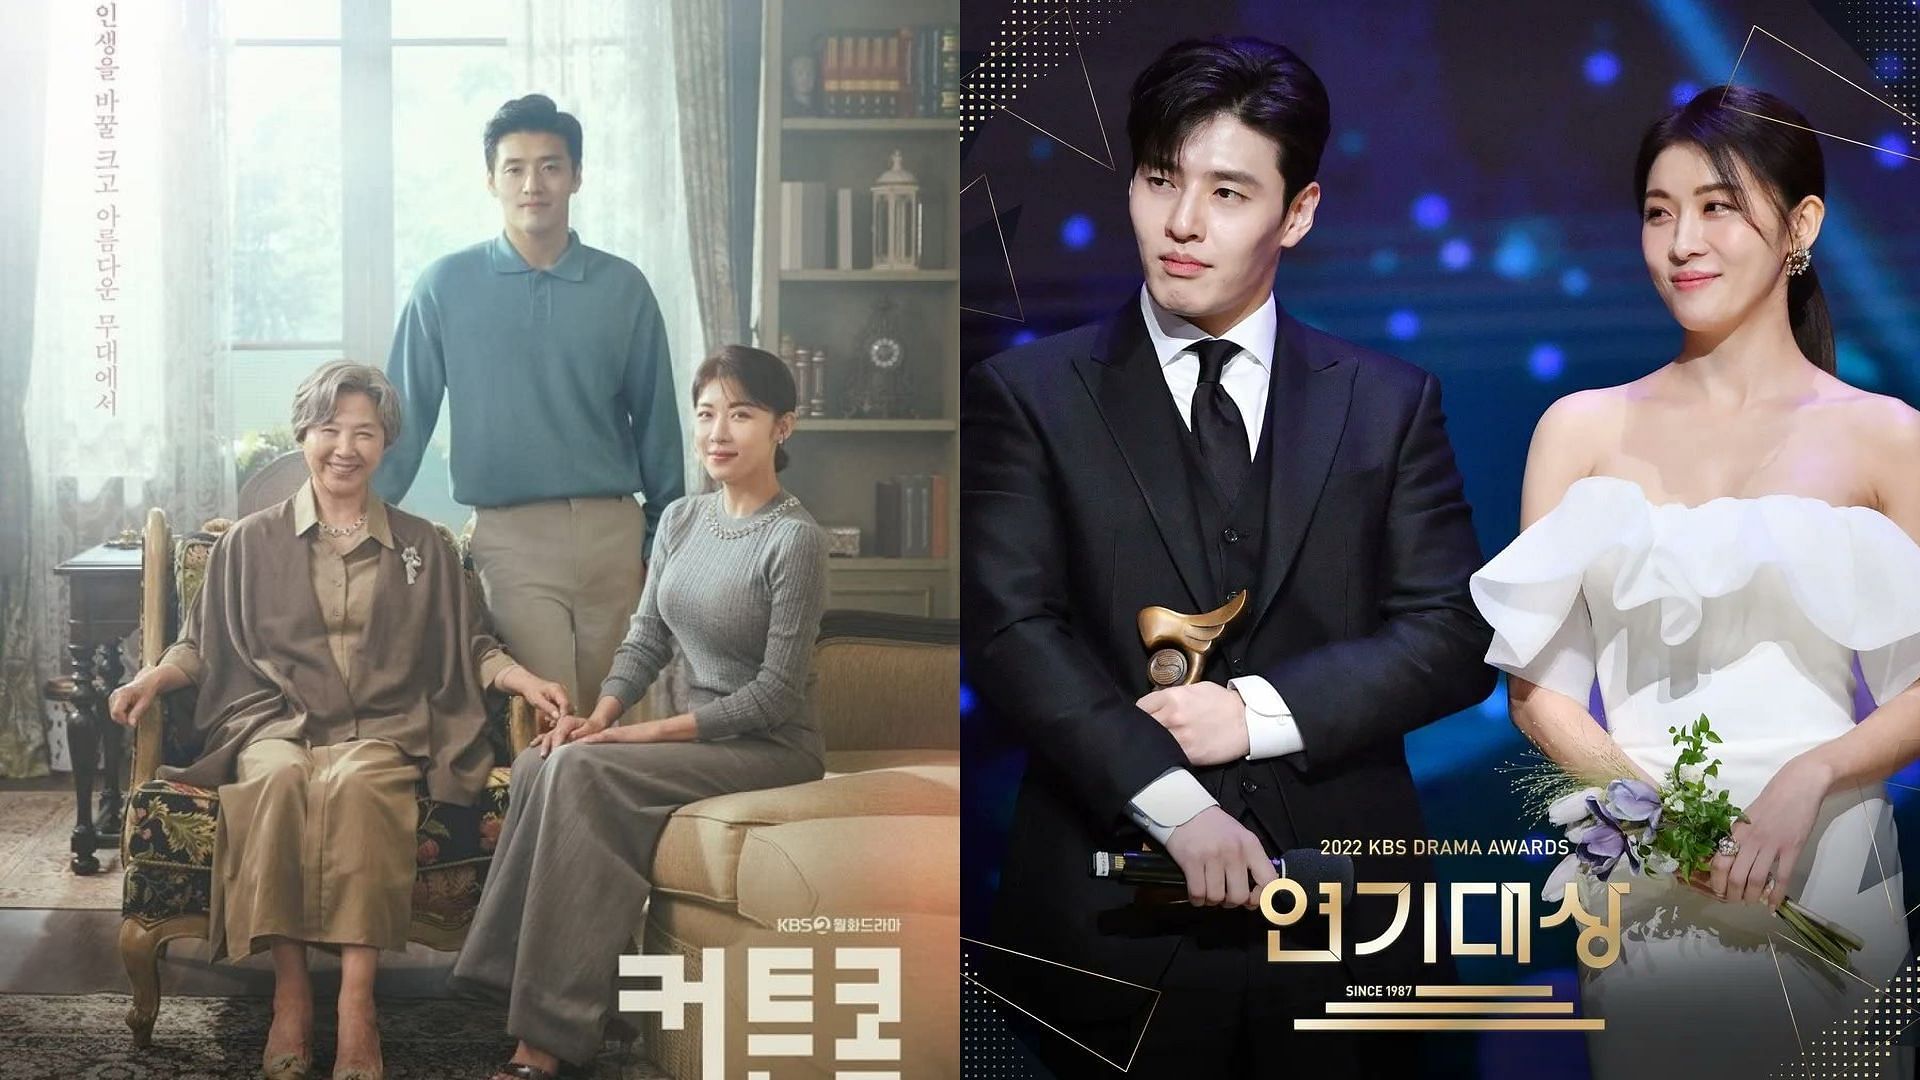 Curtain Call bags six wins at the 2022 KBS Drama Awards (Images via IMDb and Twitter/OfficialKHNPH)